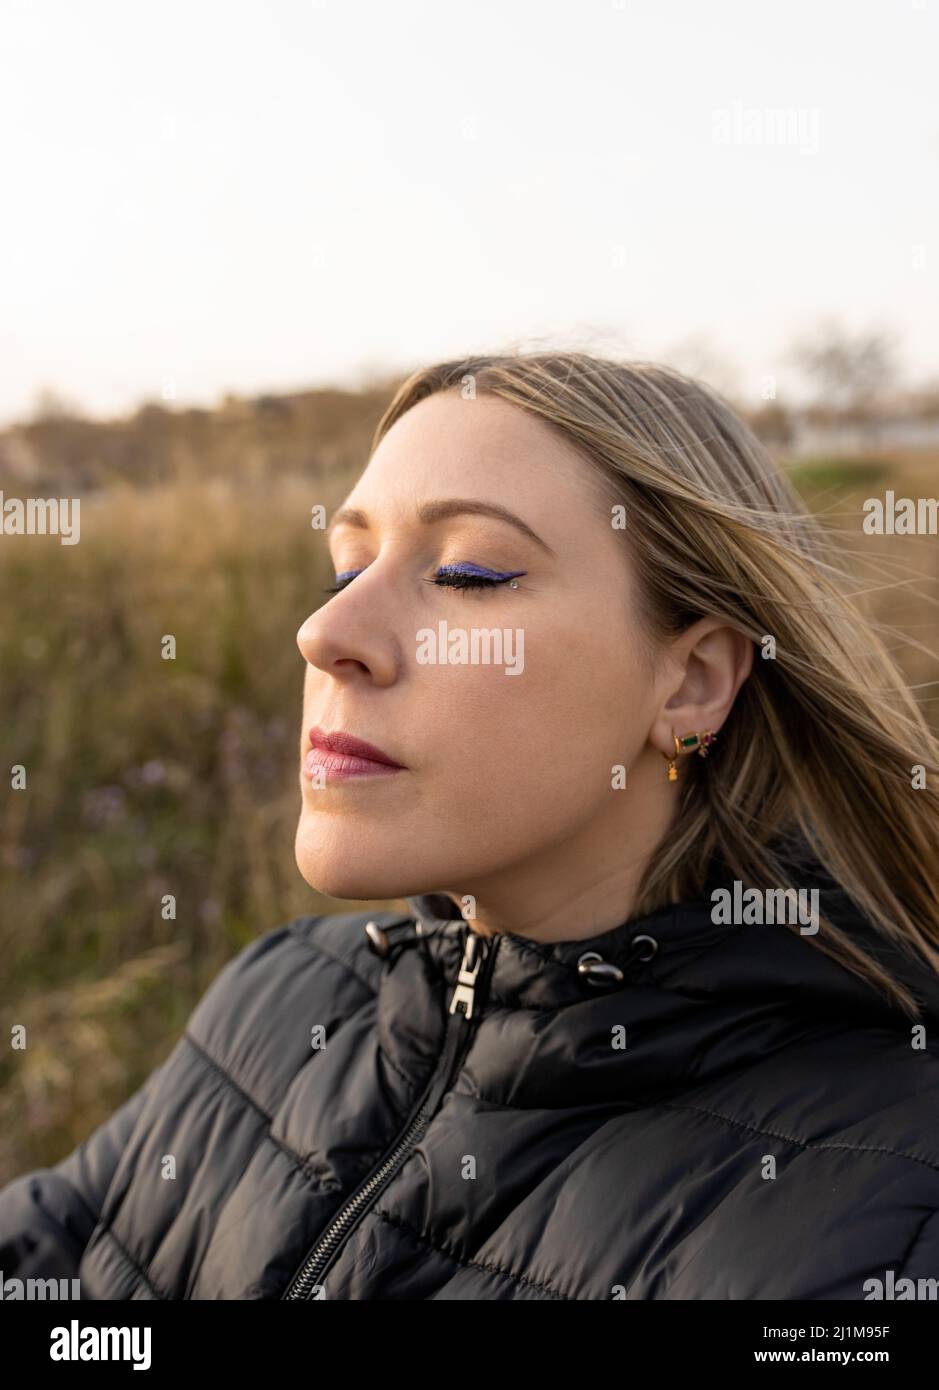 Young woman enjoying the peace and quiet in nature Stock Photo